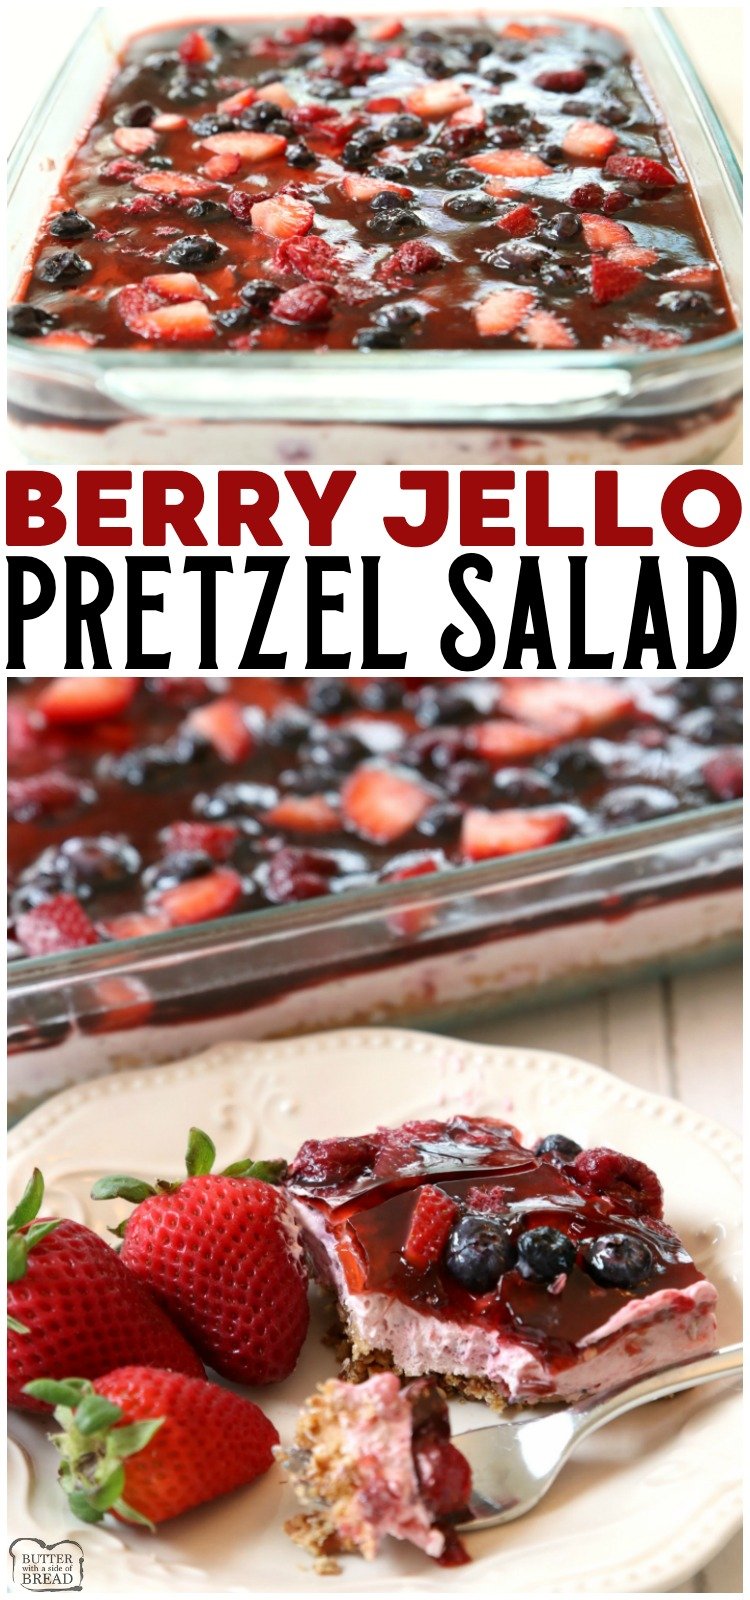 Berry Jello Pretzel Salad is one of my favorite Jello salad recipes. It's pretty, it's tasty, and because it's a Jello recipe it's really easy to make! #jello #jellorecipes #jellosalad #jellosaladrecipes #berry #berryjello #easydessert Butter With a Side of Bread